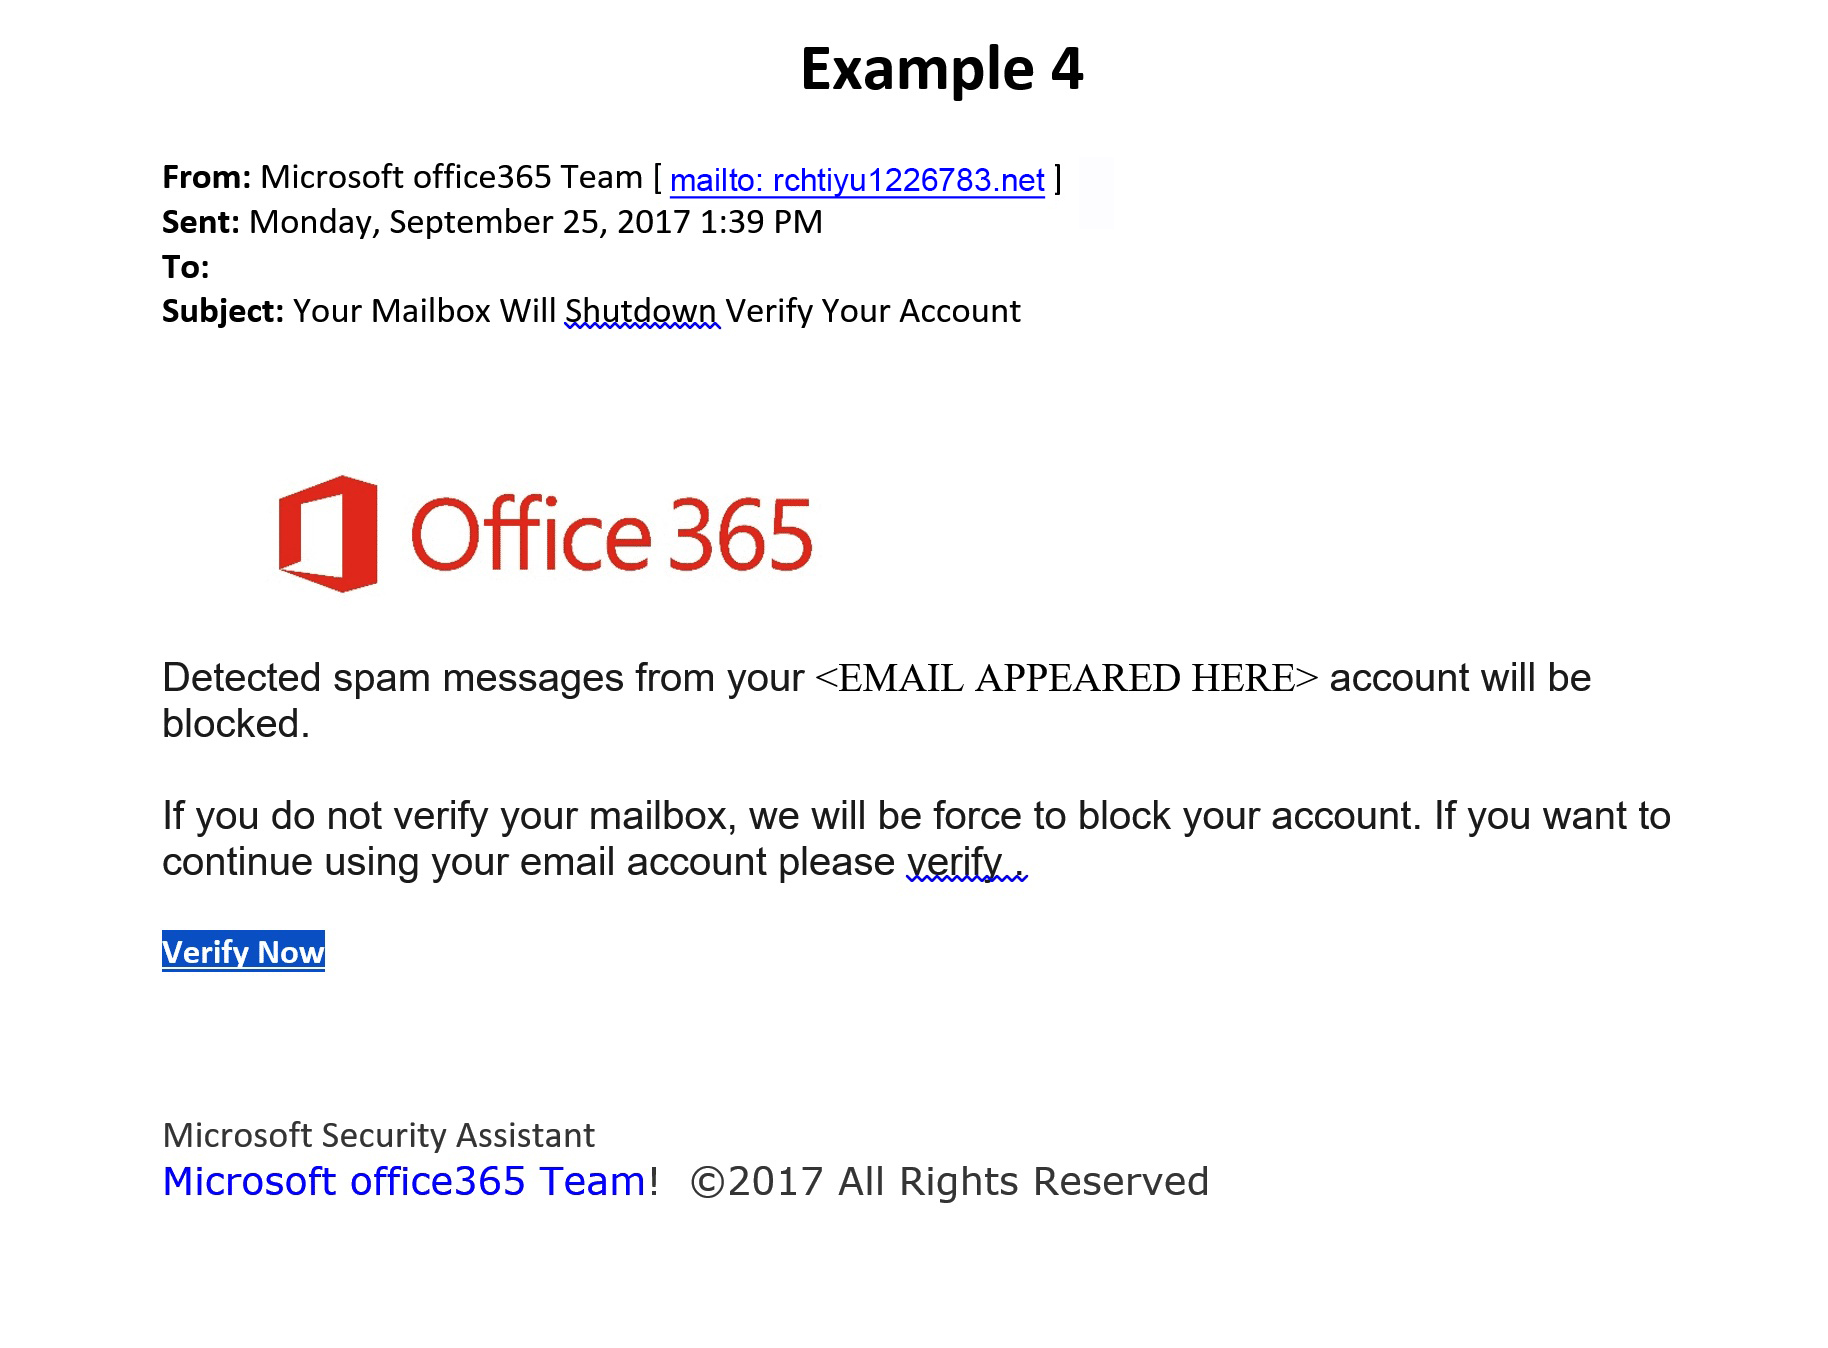 Is this a legitimate Microsoft email or is this a Phishing email and how  can I tell? - Information Security Stack Exchange